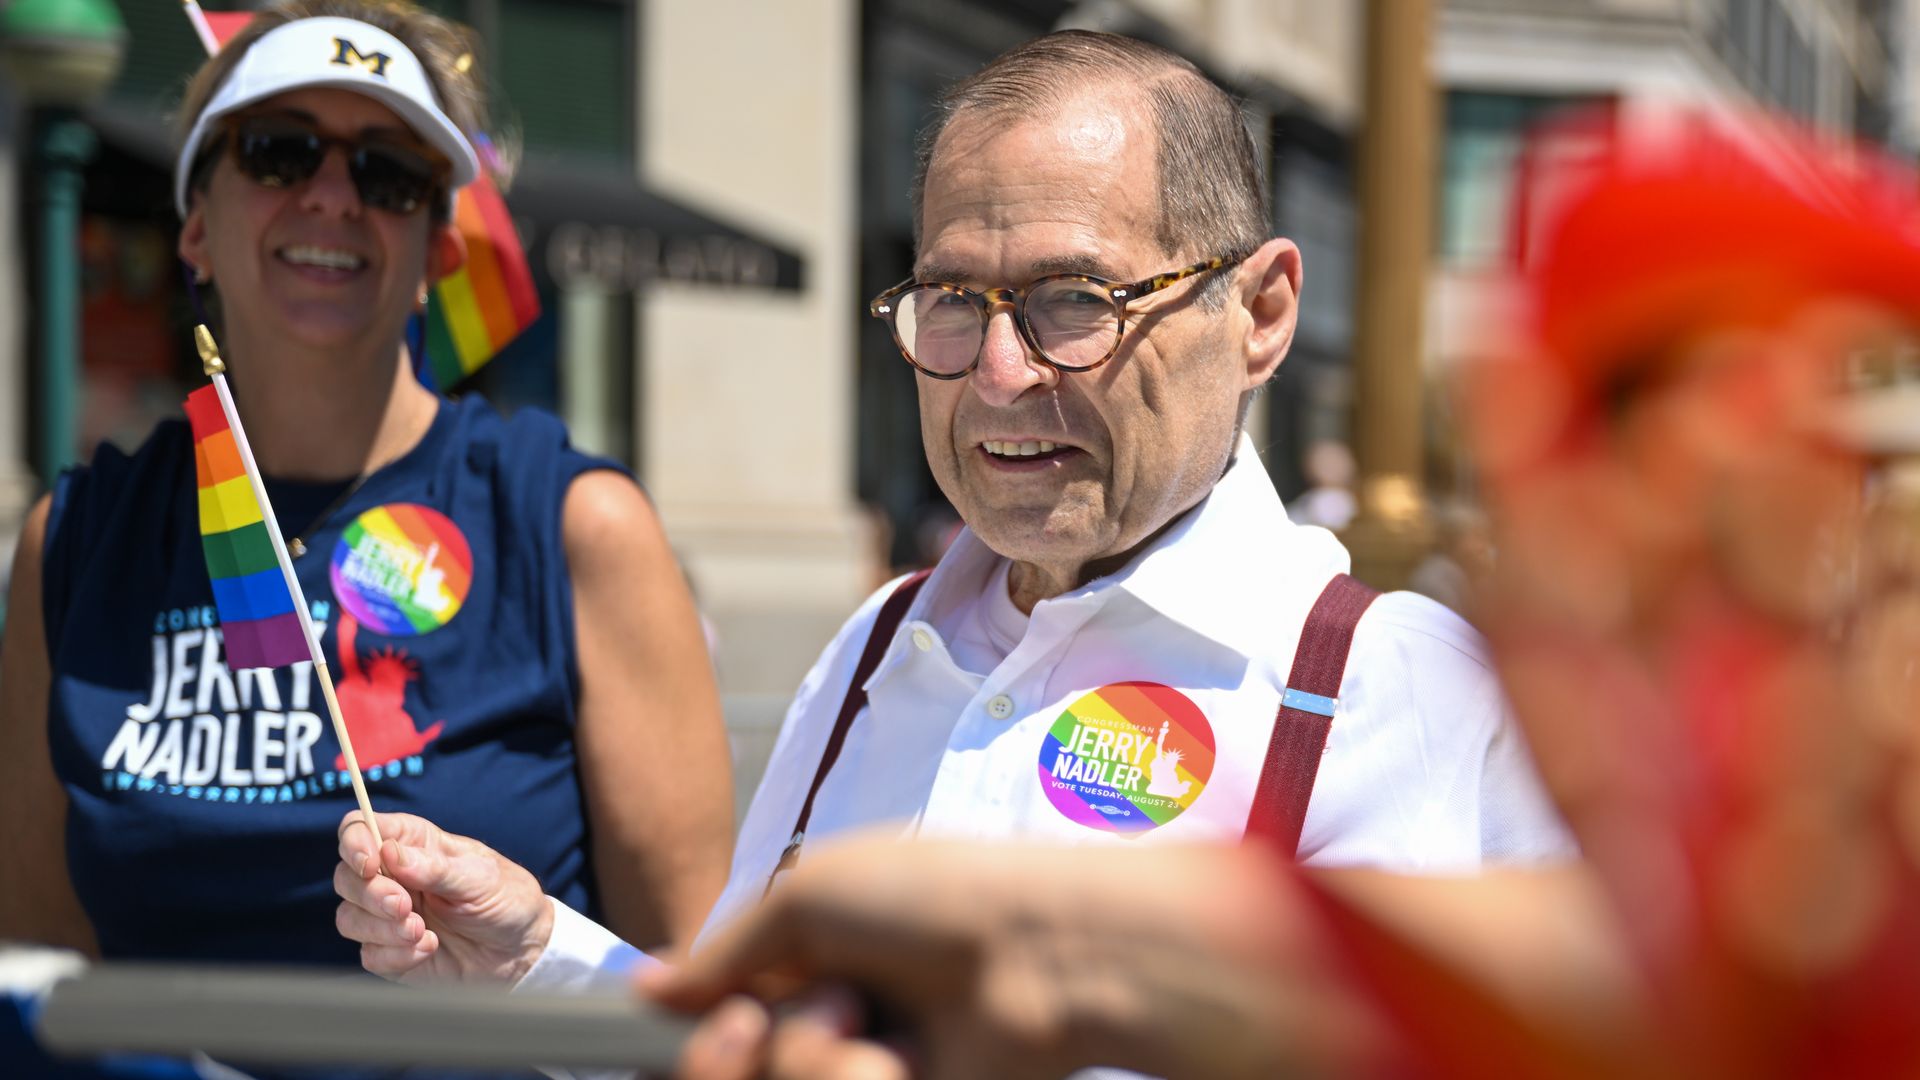 House Judiciary Committee chairman Rep. Jerry Nadler (D-NY) participates in the New York City Pride Parade on June 26.